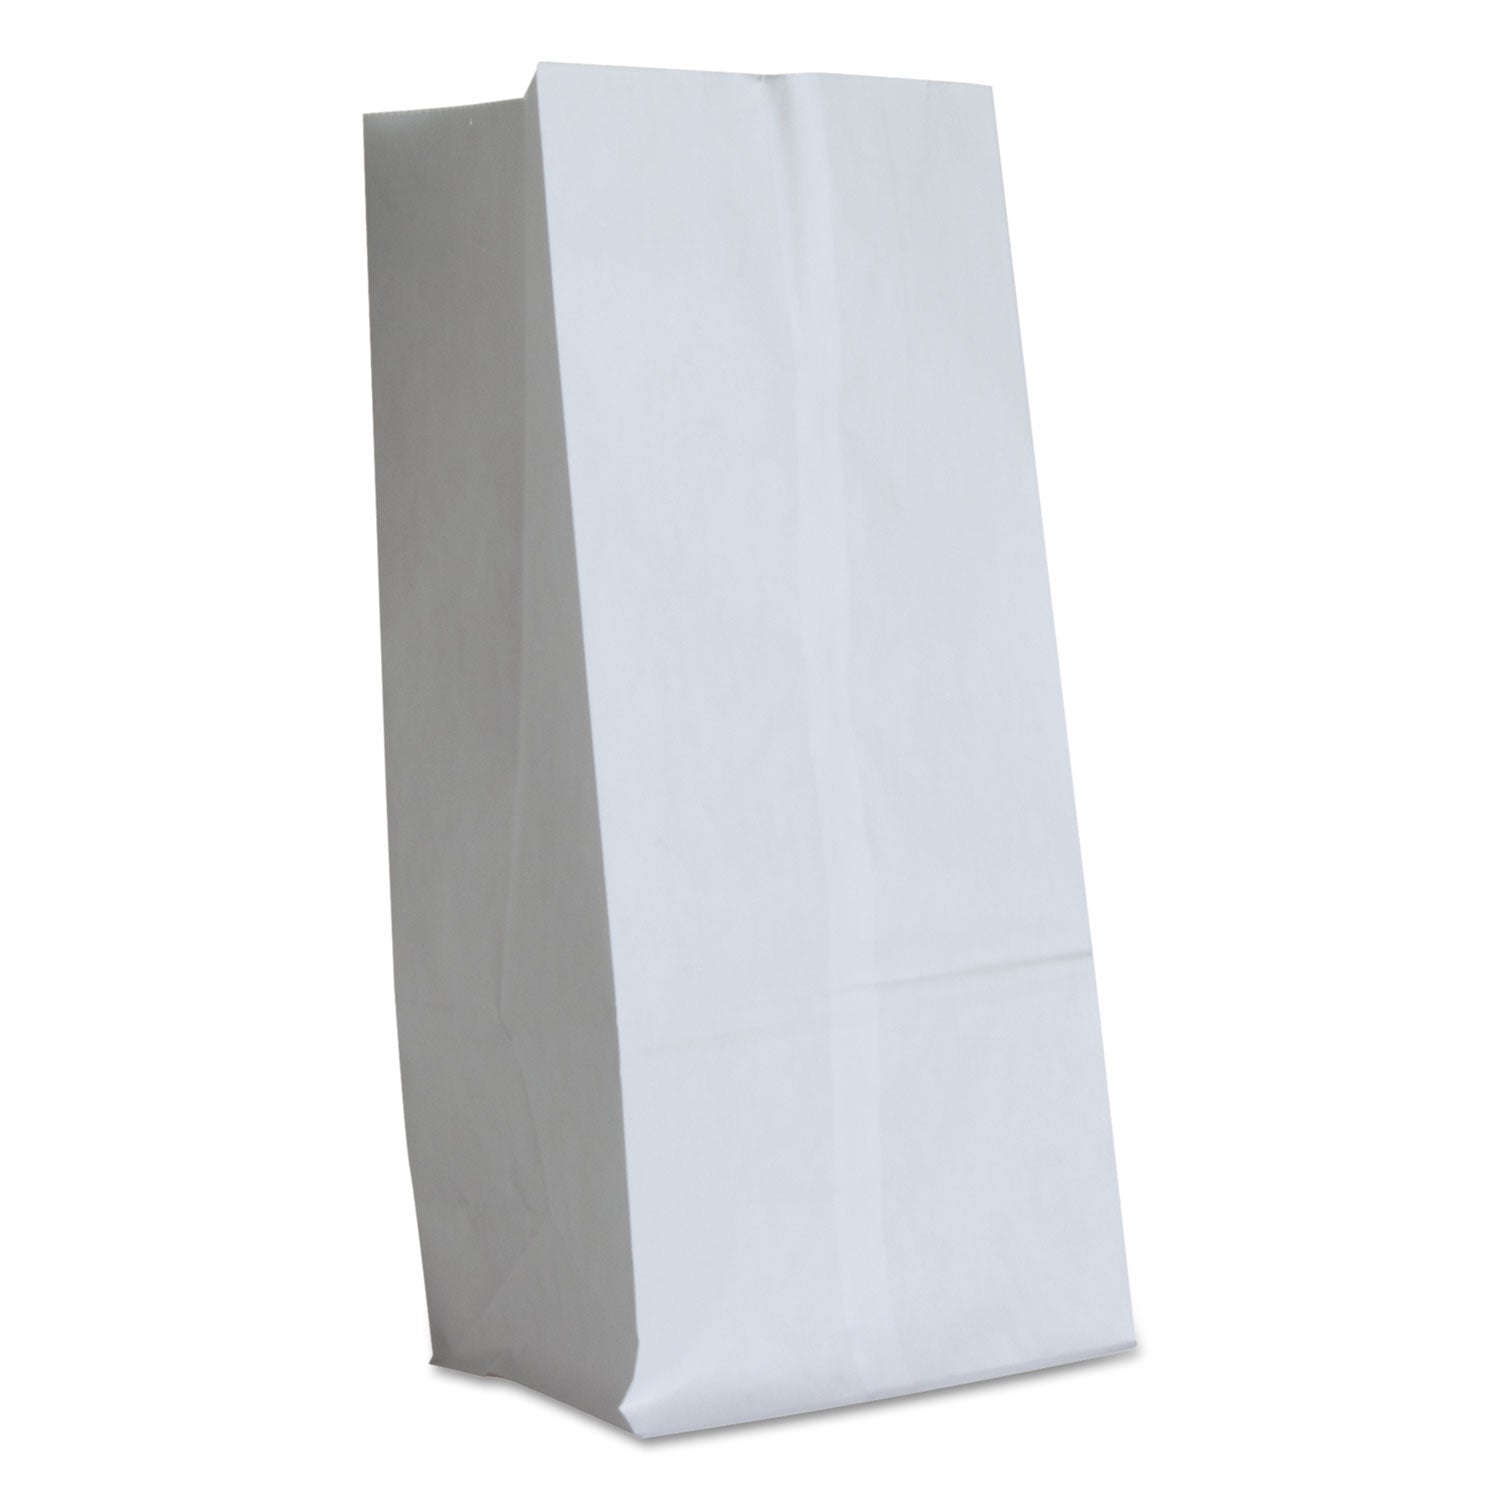 grocery-paper-bags-40-lb-capacity-#16-775-x-481-x-16-white-500-bags_baggw16500 - 1